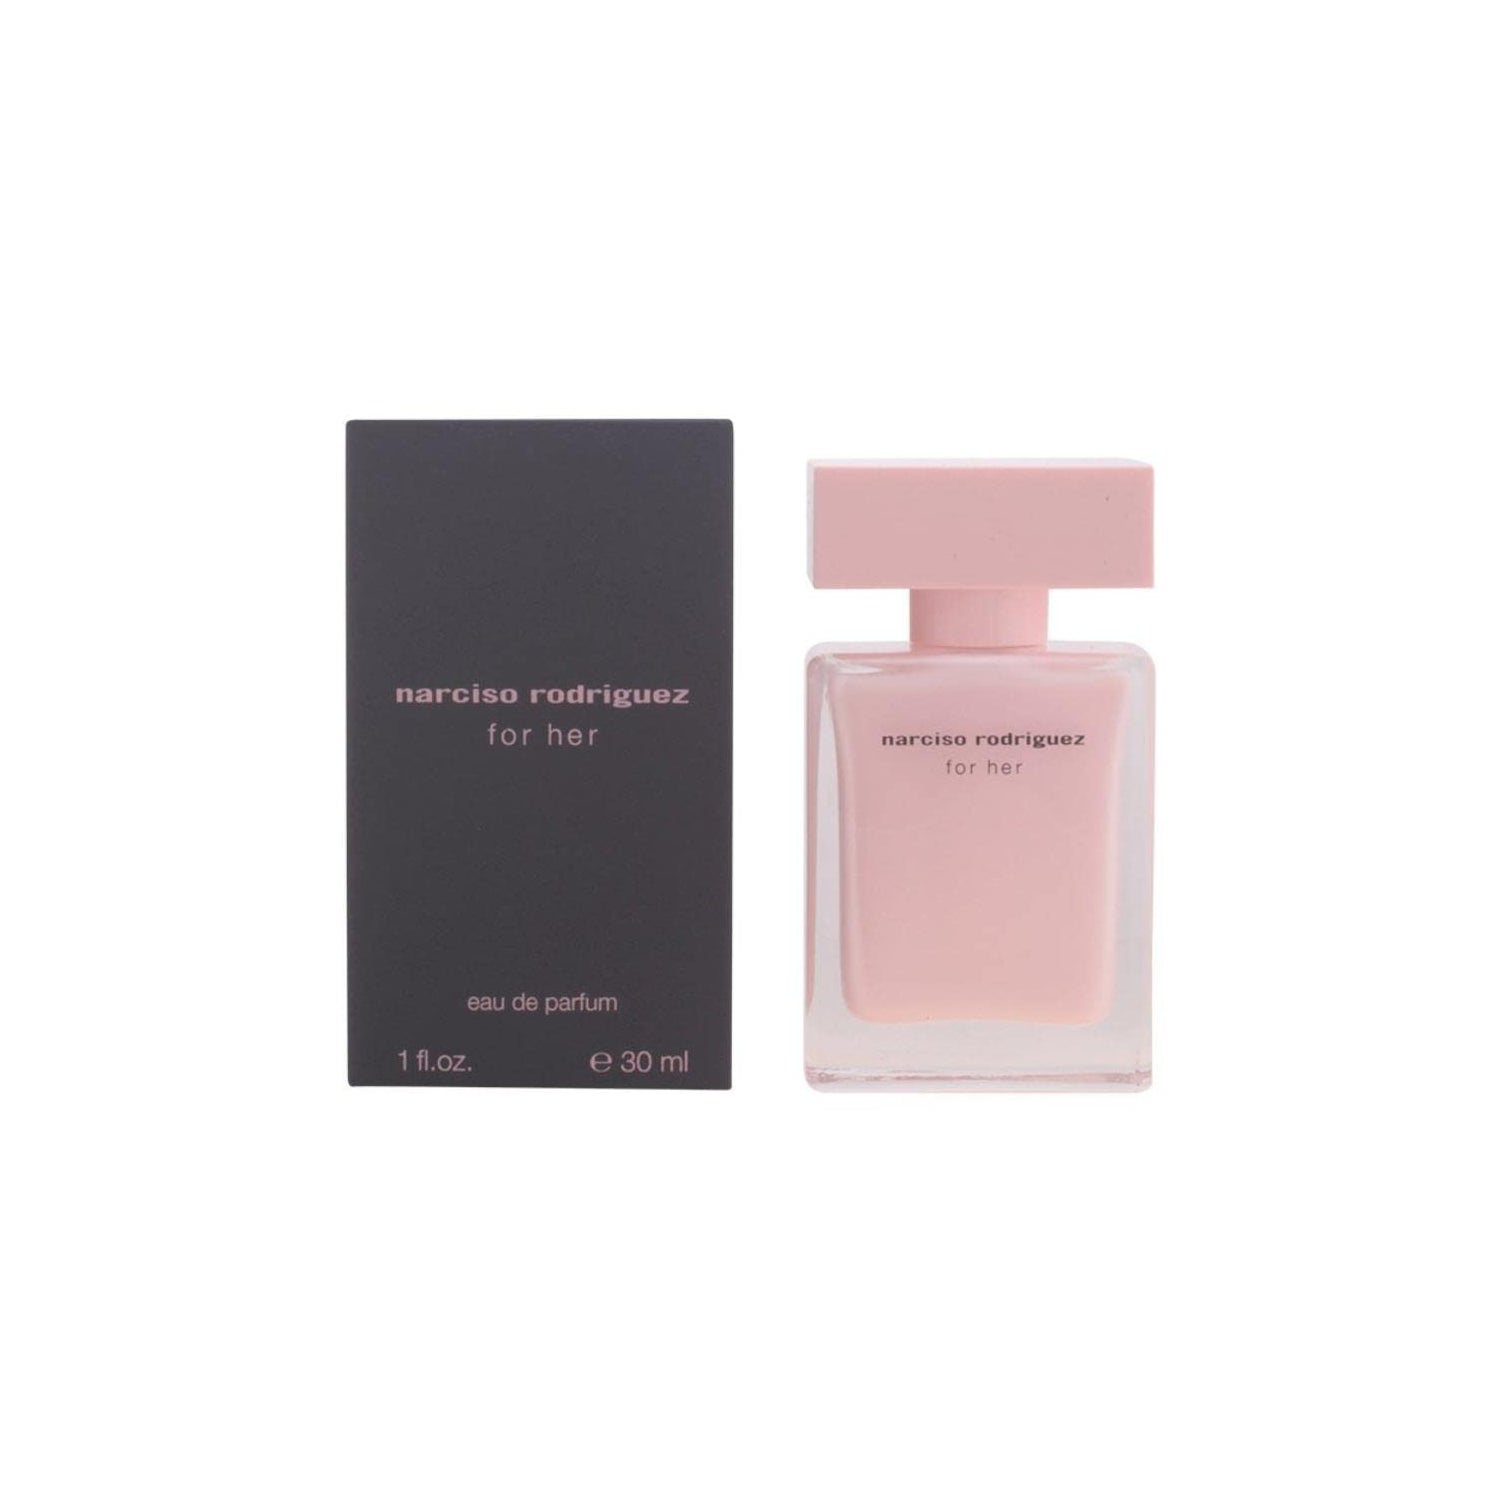 All of me narciso rodriguez. Narciso Rodriguez for her 30 мл. Narciso Rodriguez EDP. Нарциссо Родригес EDP. Narciso Rodriguez for her Eau de Toilette.